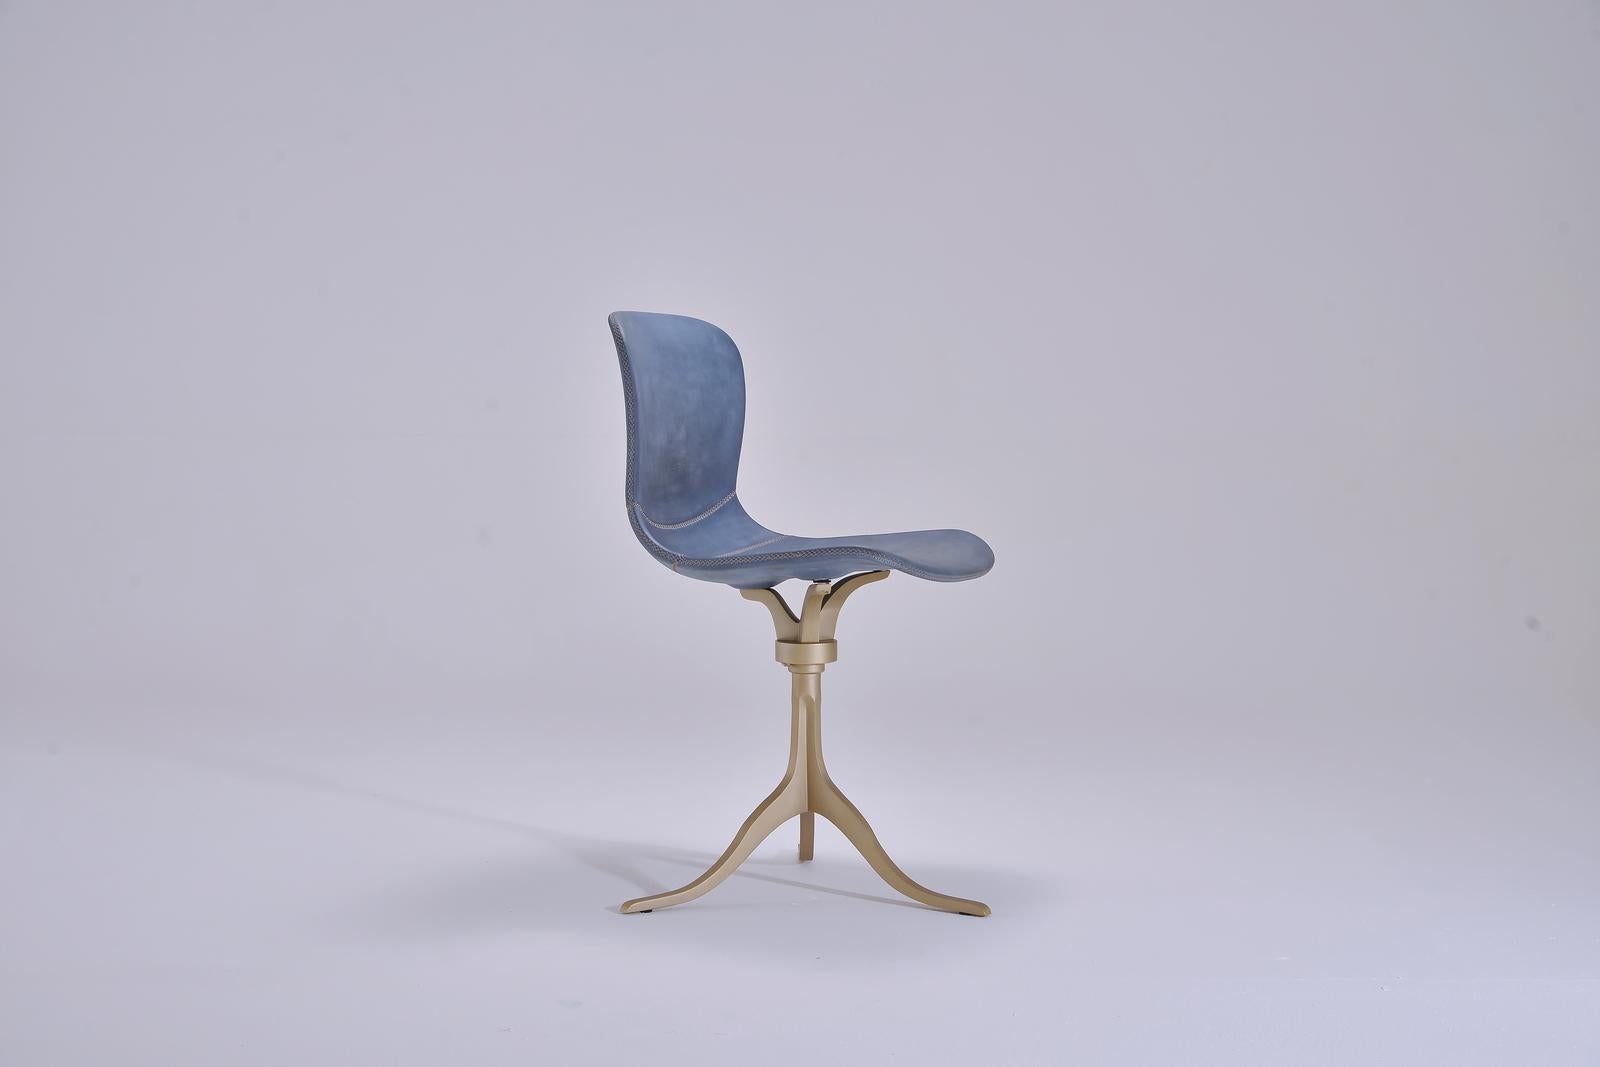 Model: PT43 chair with swivel
Seat: Leather
Seat color: Paris plage (Blue)
Base: PT43 base, with swivels and hand cast brass
Base finish: Golden sand
Dimensions: 52 x 50 x 80 cm (seat height 47 cm)
(W x D x H) 20.5 x 19.7 x 31.89 inch (seat